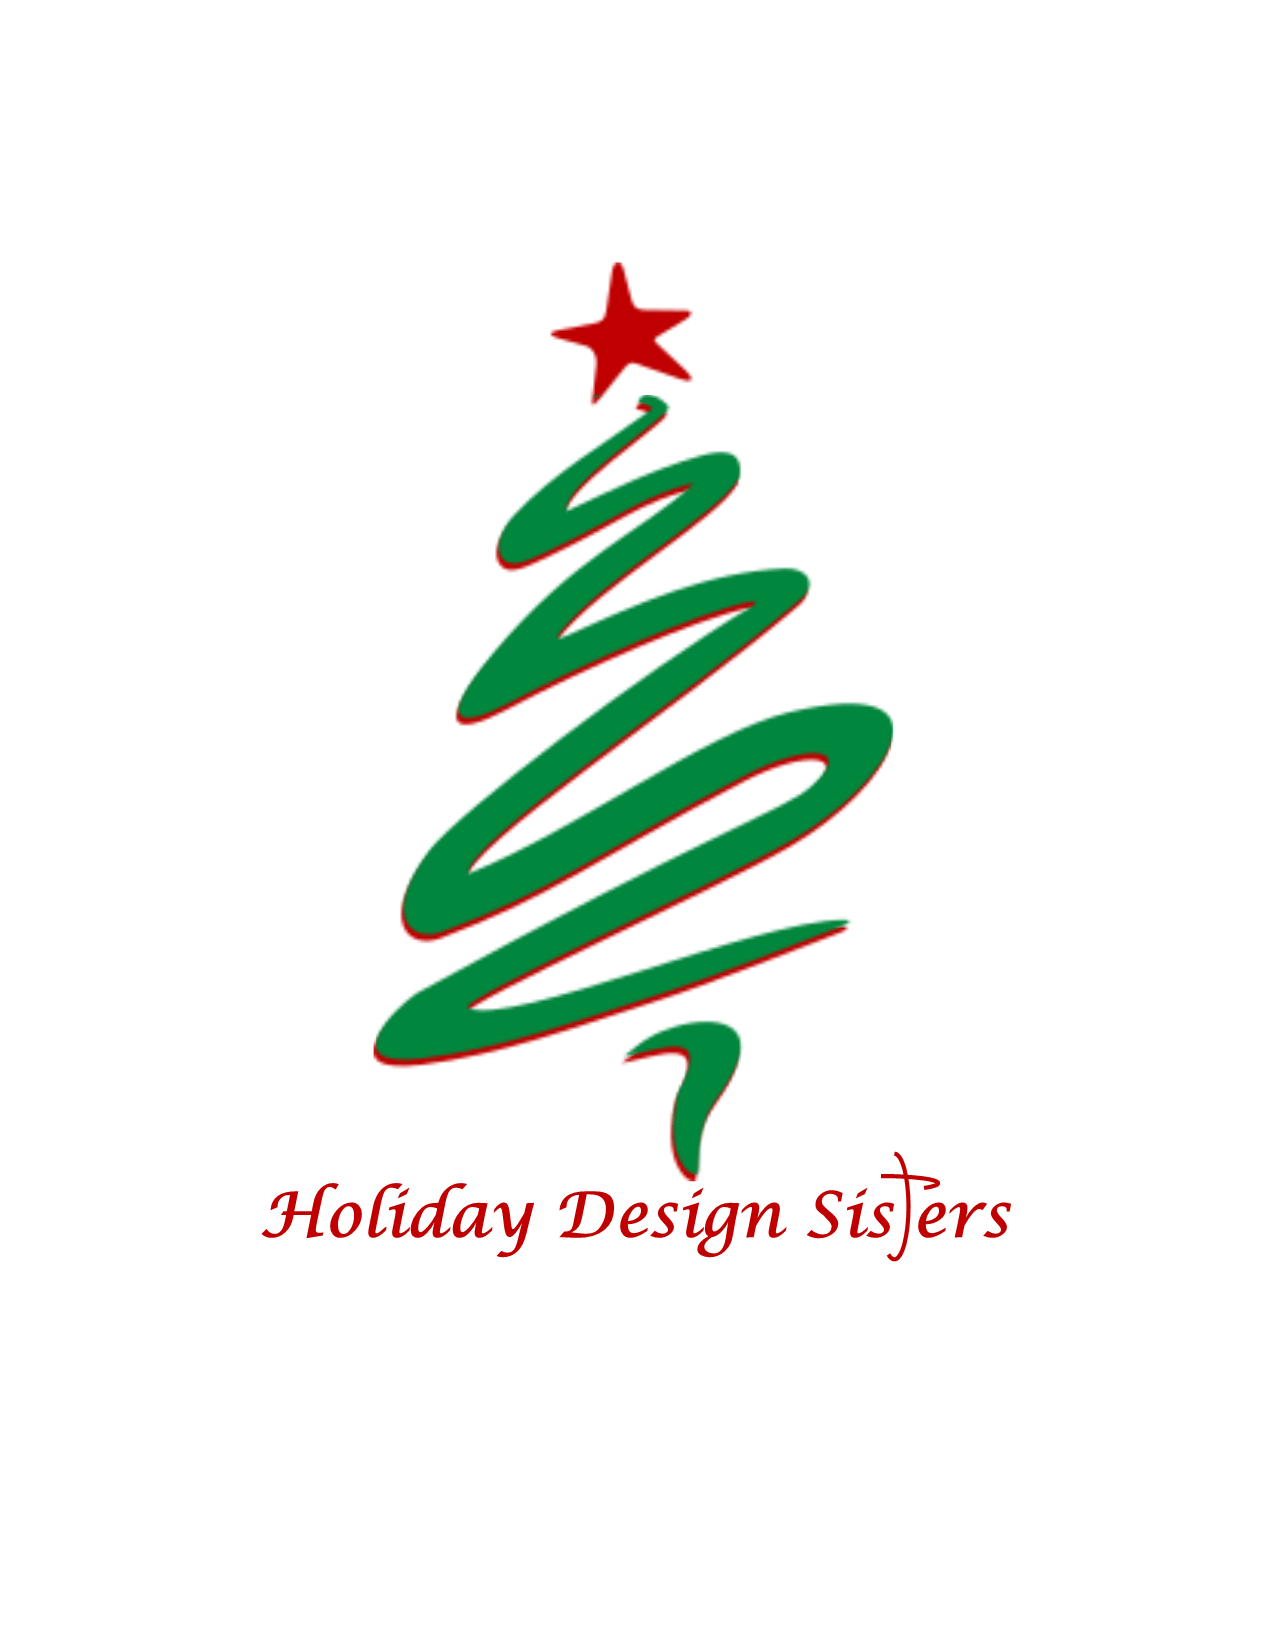 Holiday Design Sisters